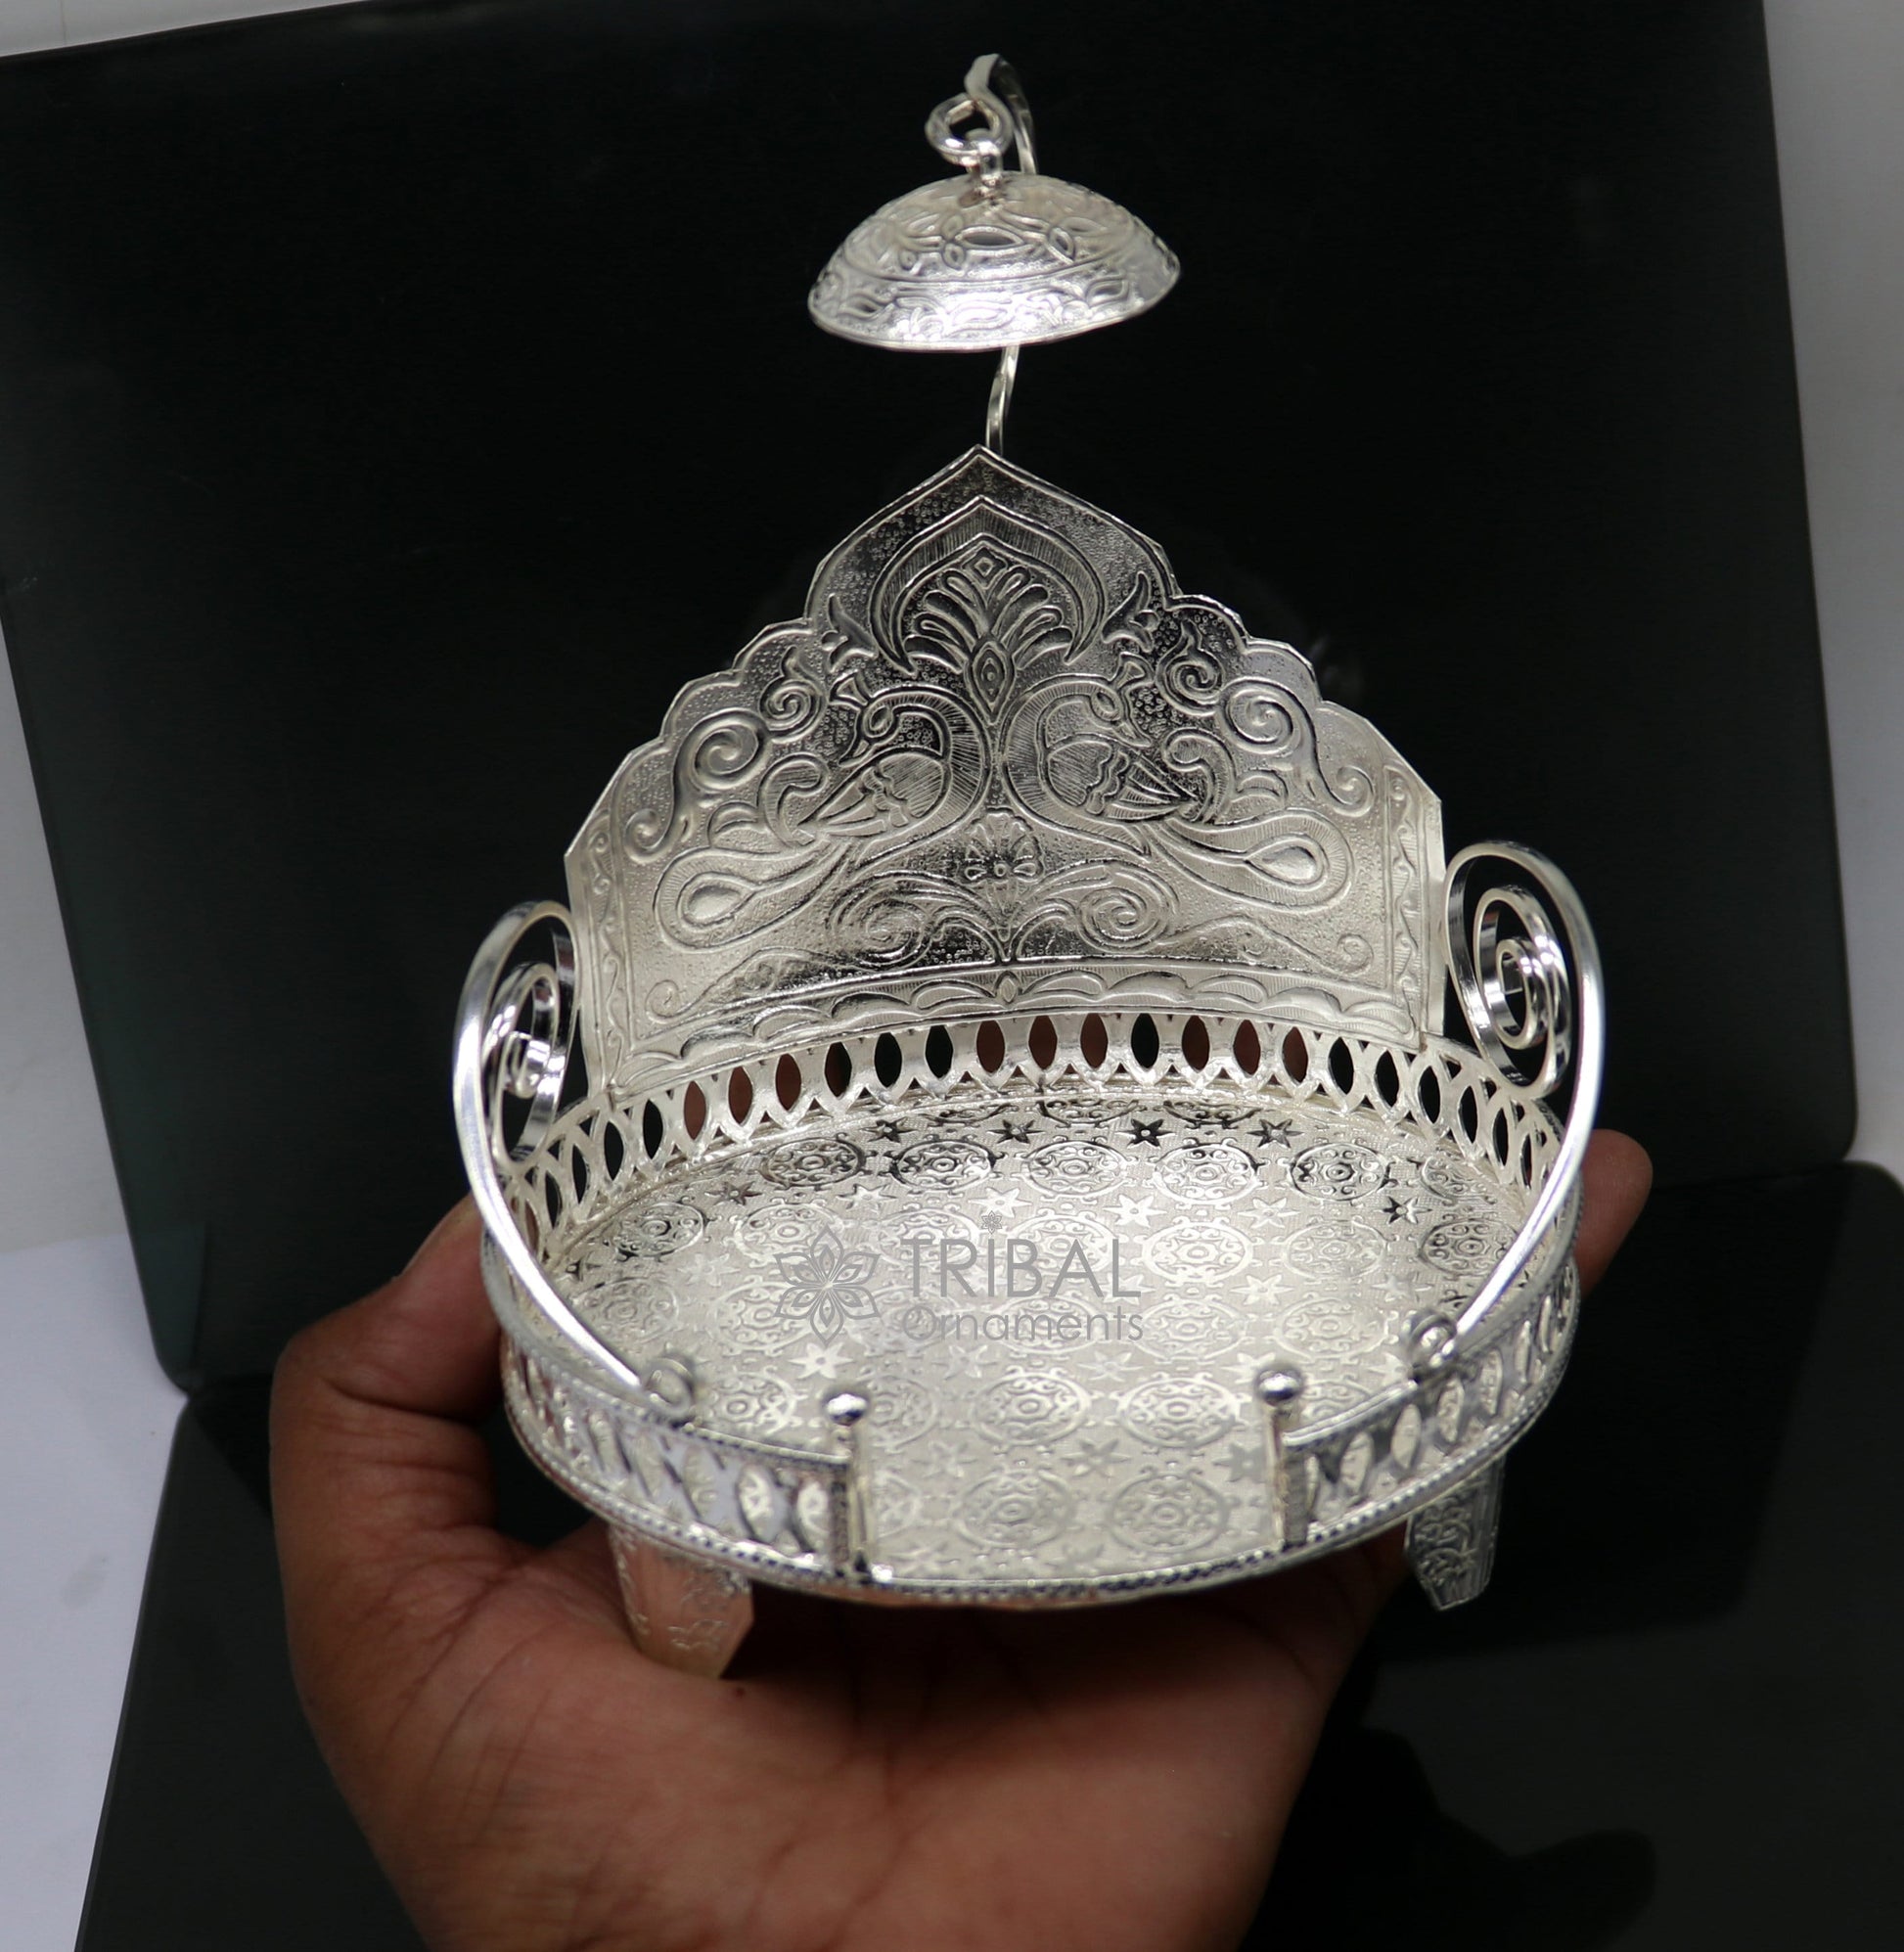 925 sterling silver sterling Sinhasan, singhasan idol god throne, god statue's divine chair, temple puja article collectible article su1111 - TRIBAL ORNAMENTS